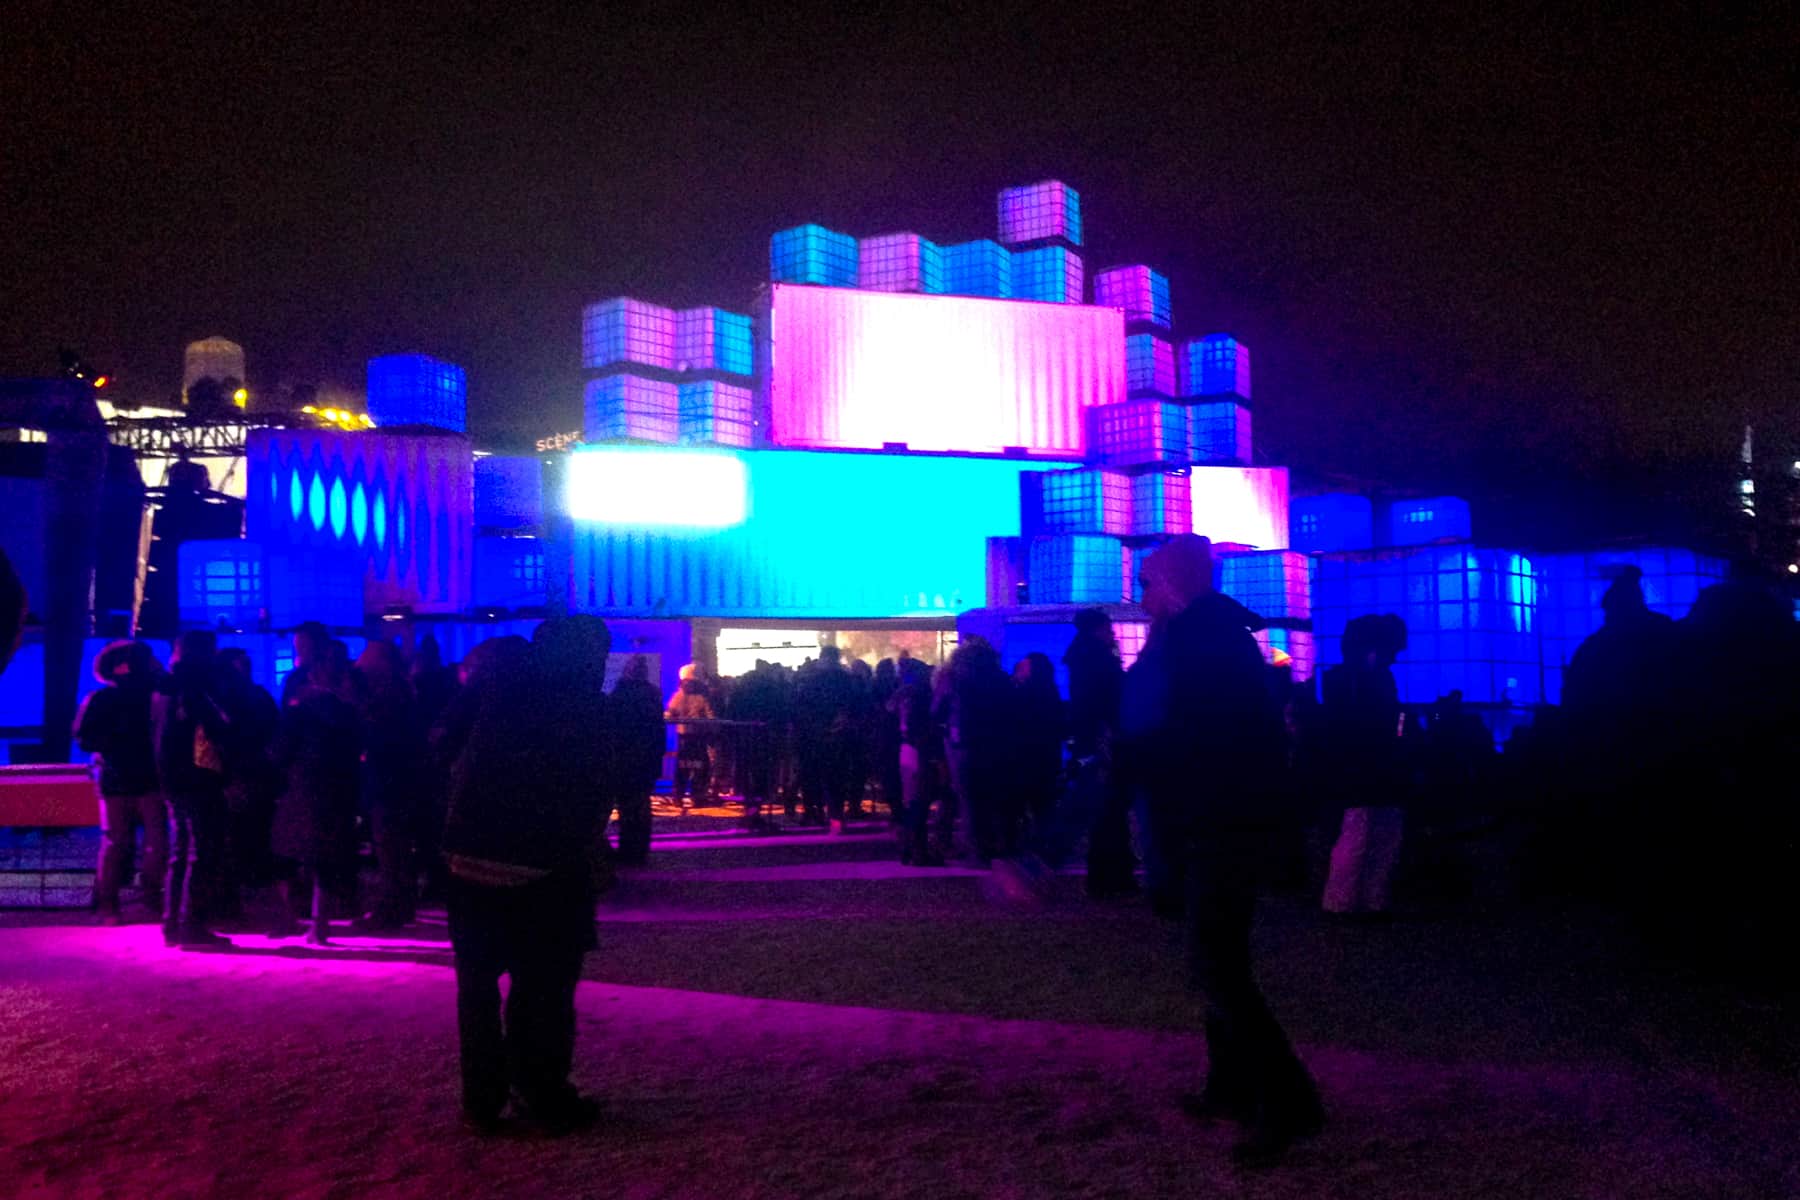 People walking towards a building made of blocks of blue and purple neon light – a night scene from the Igloofest in Montreal.